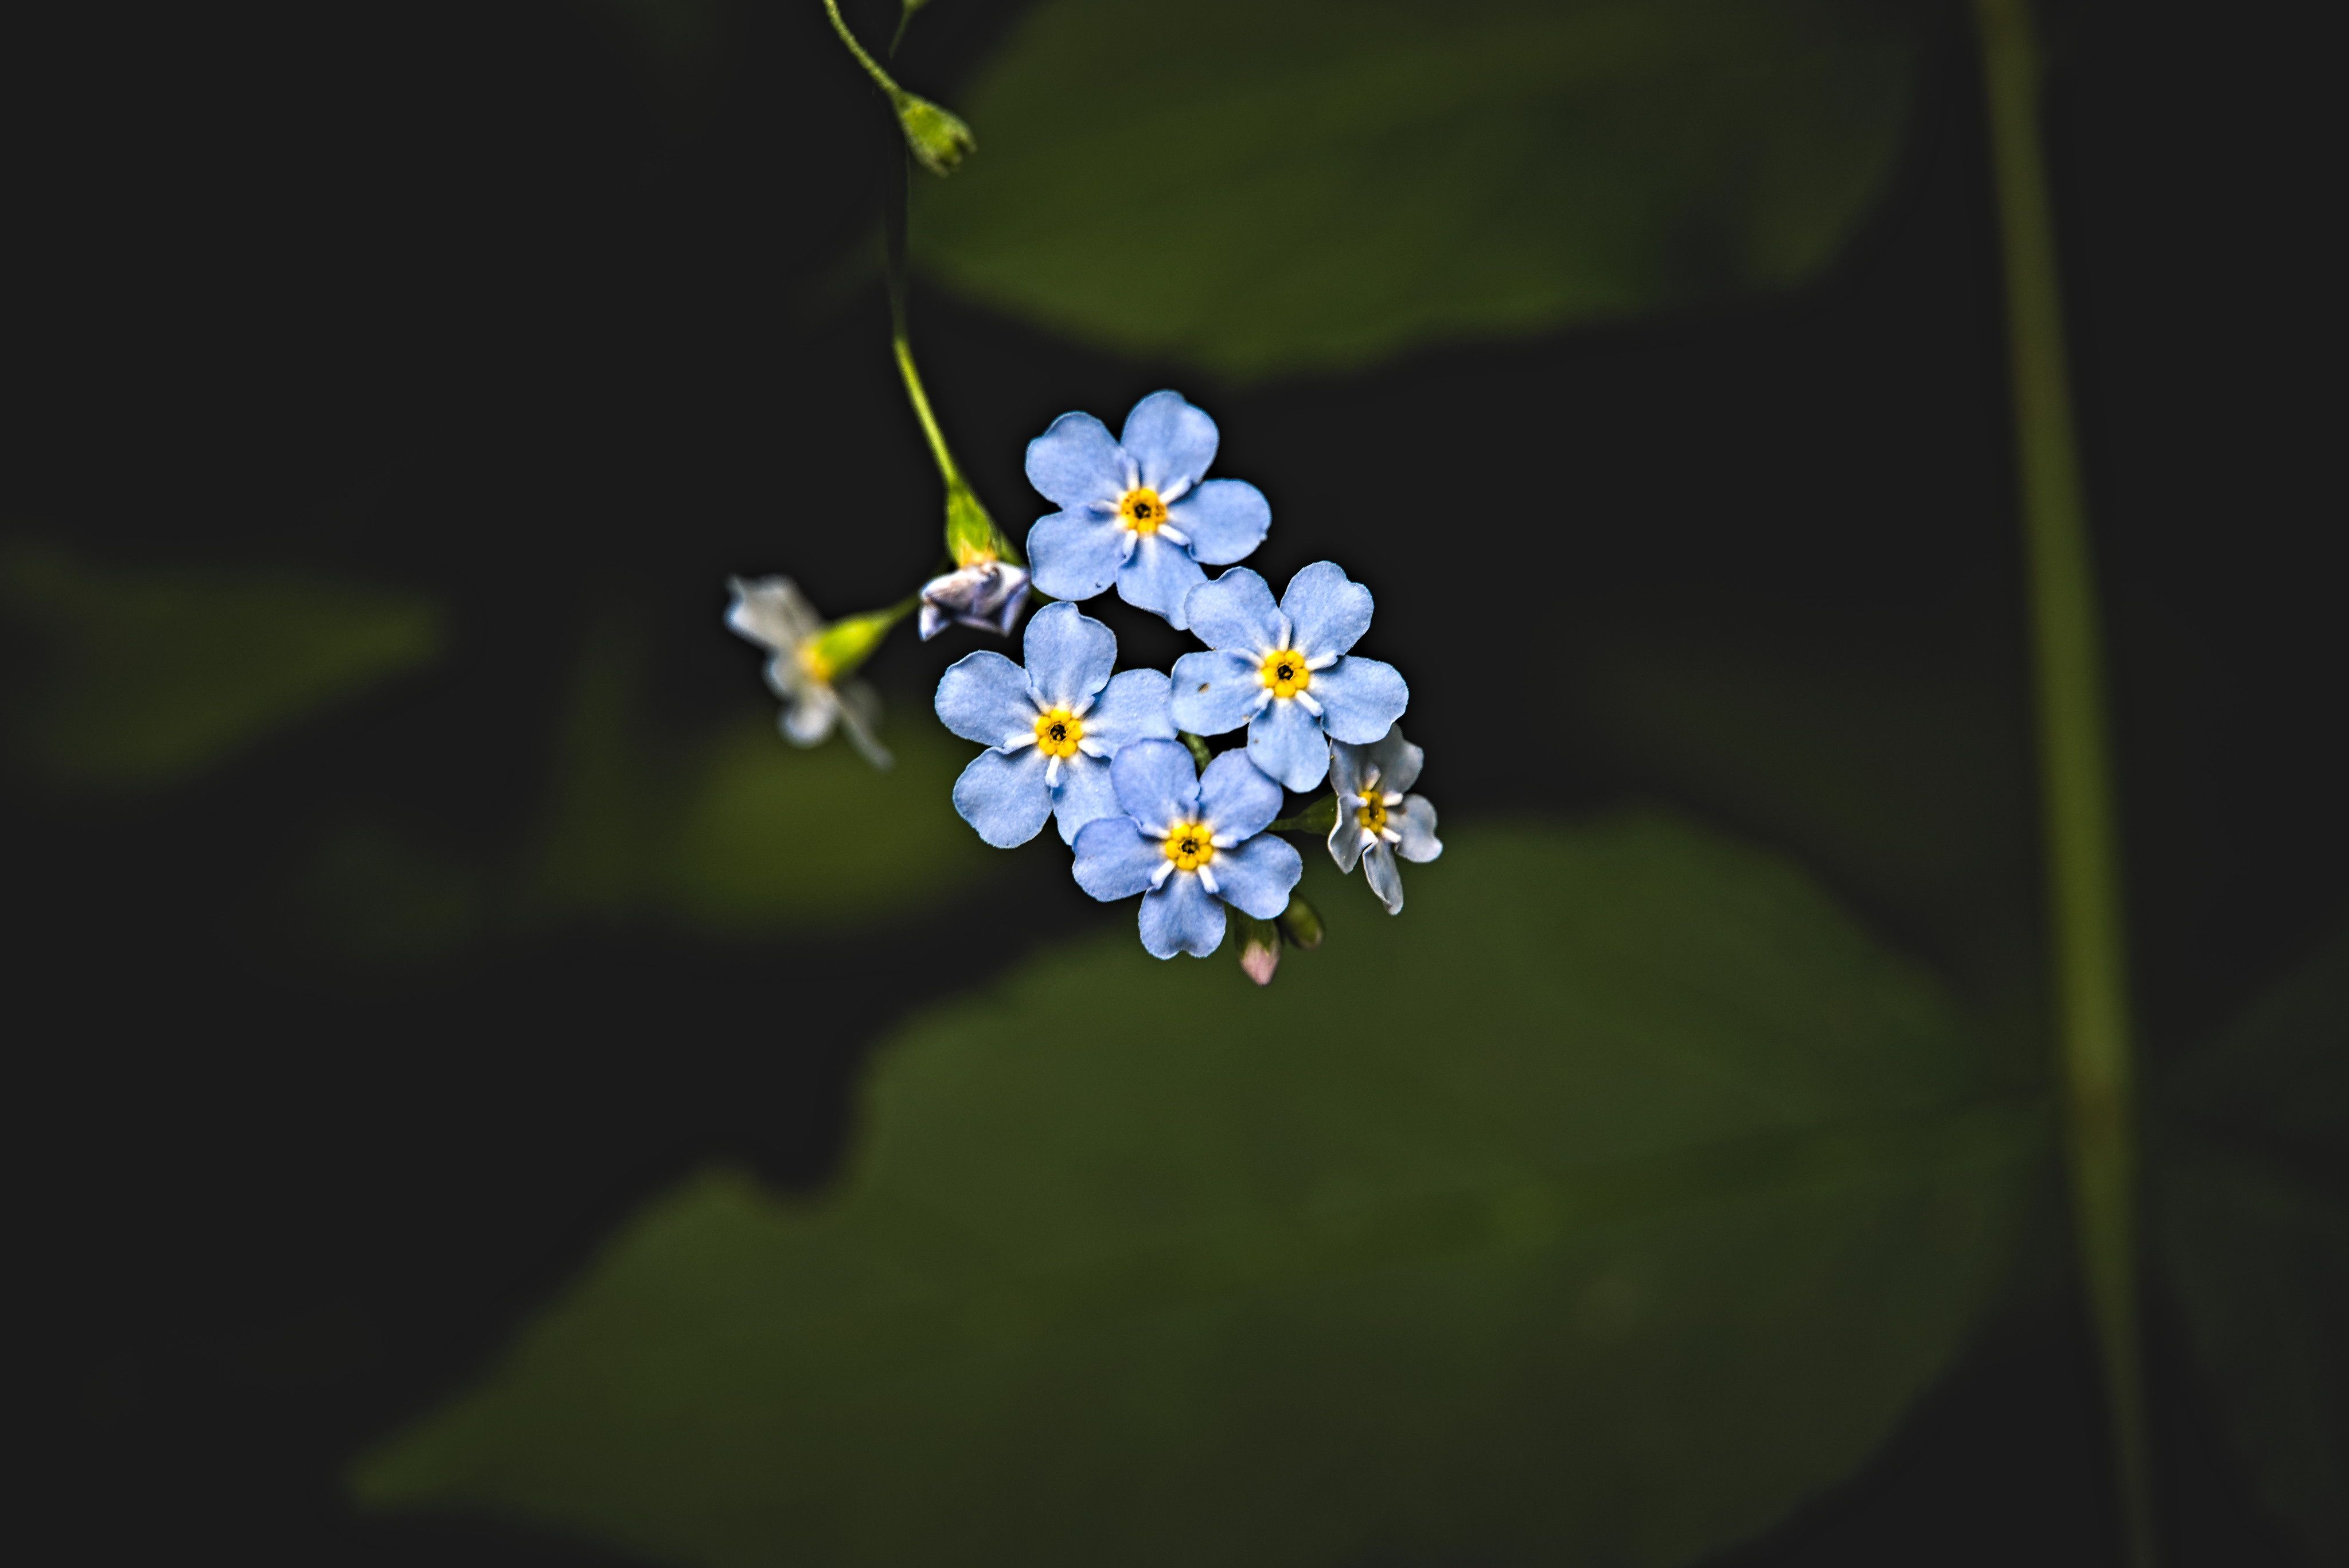 General 4096x2734 flowers depth of field macro plants nature forget-me-nots